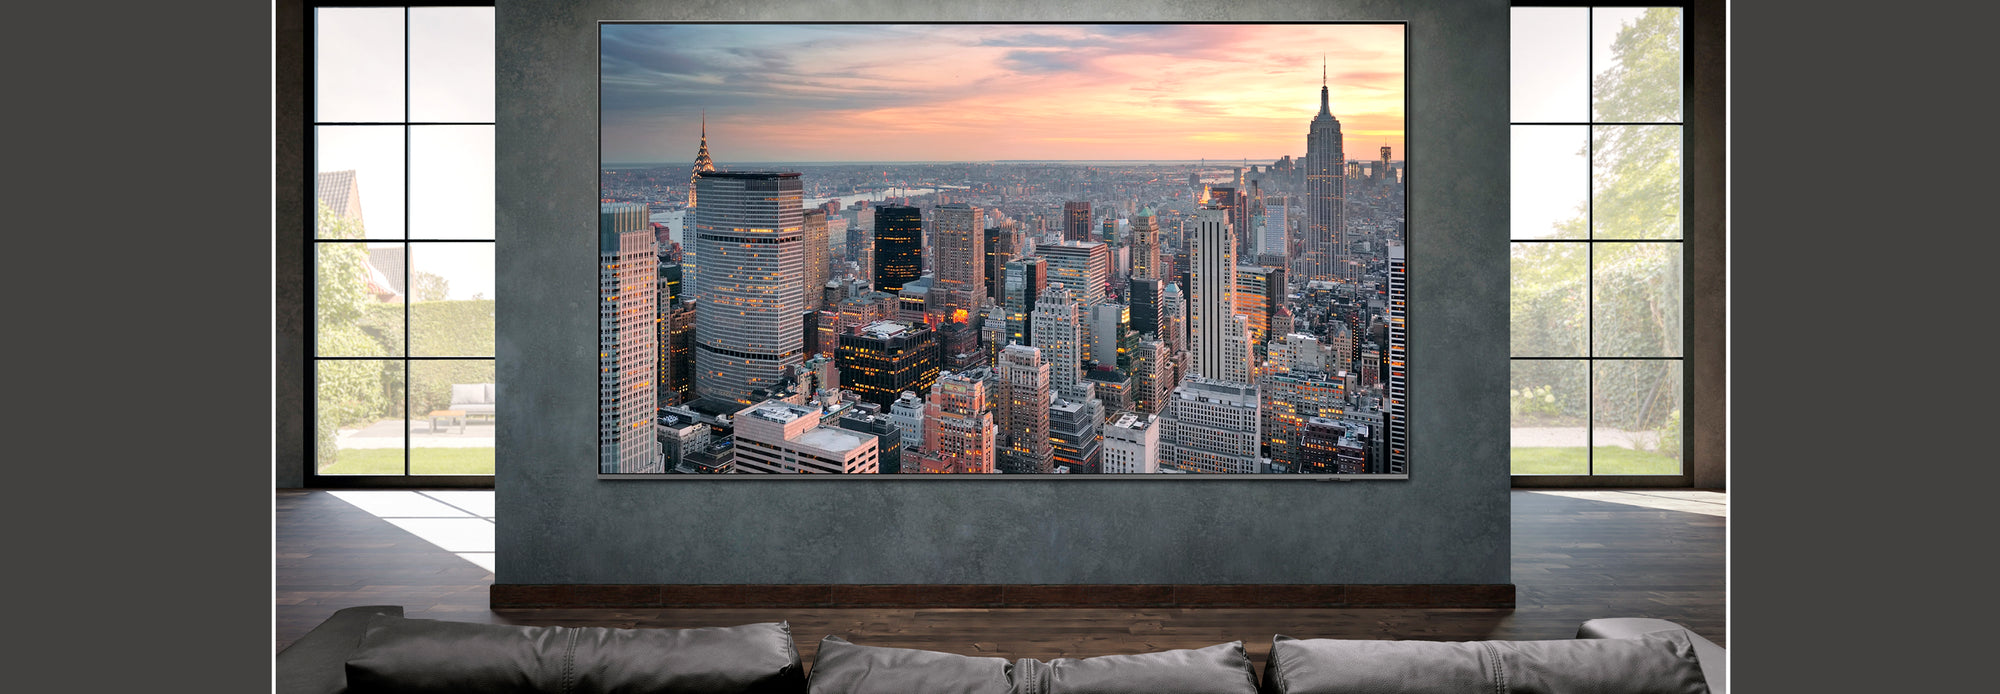 Up to 98" | SONXPLUS Rockland